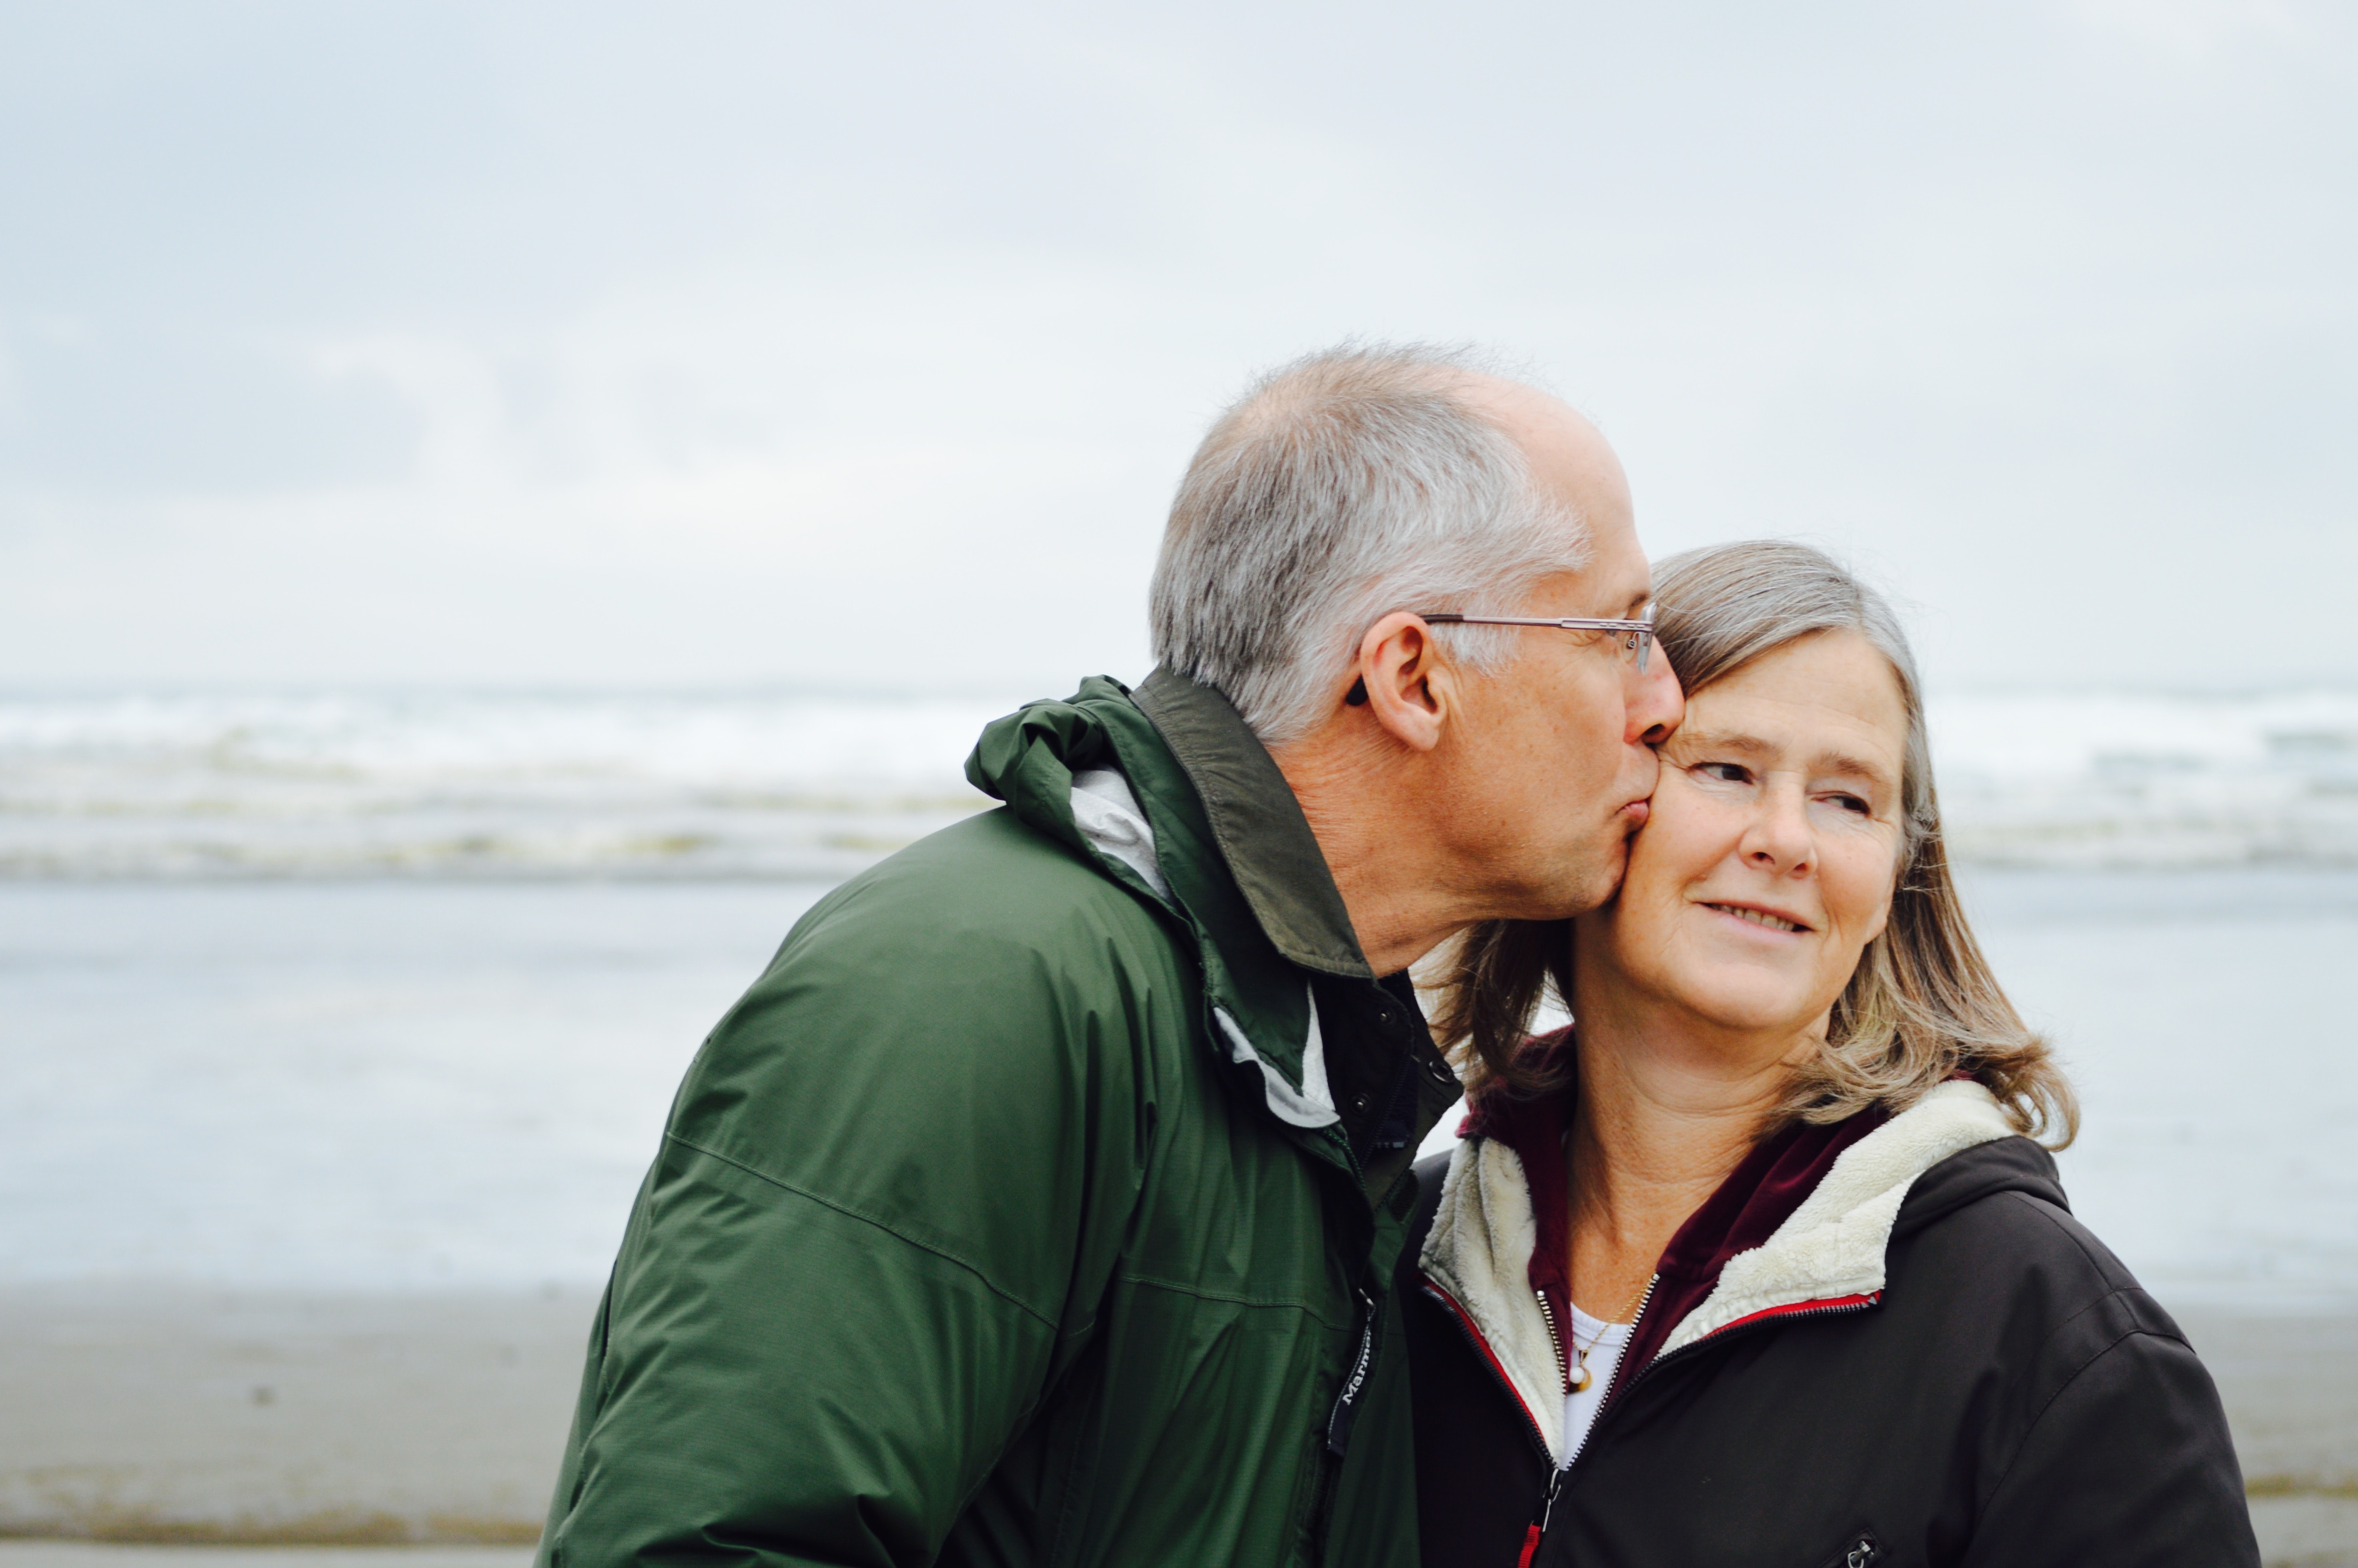 An older couple - a man and a woman - kissing on a beach wearing anoraks.